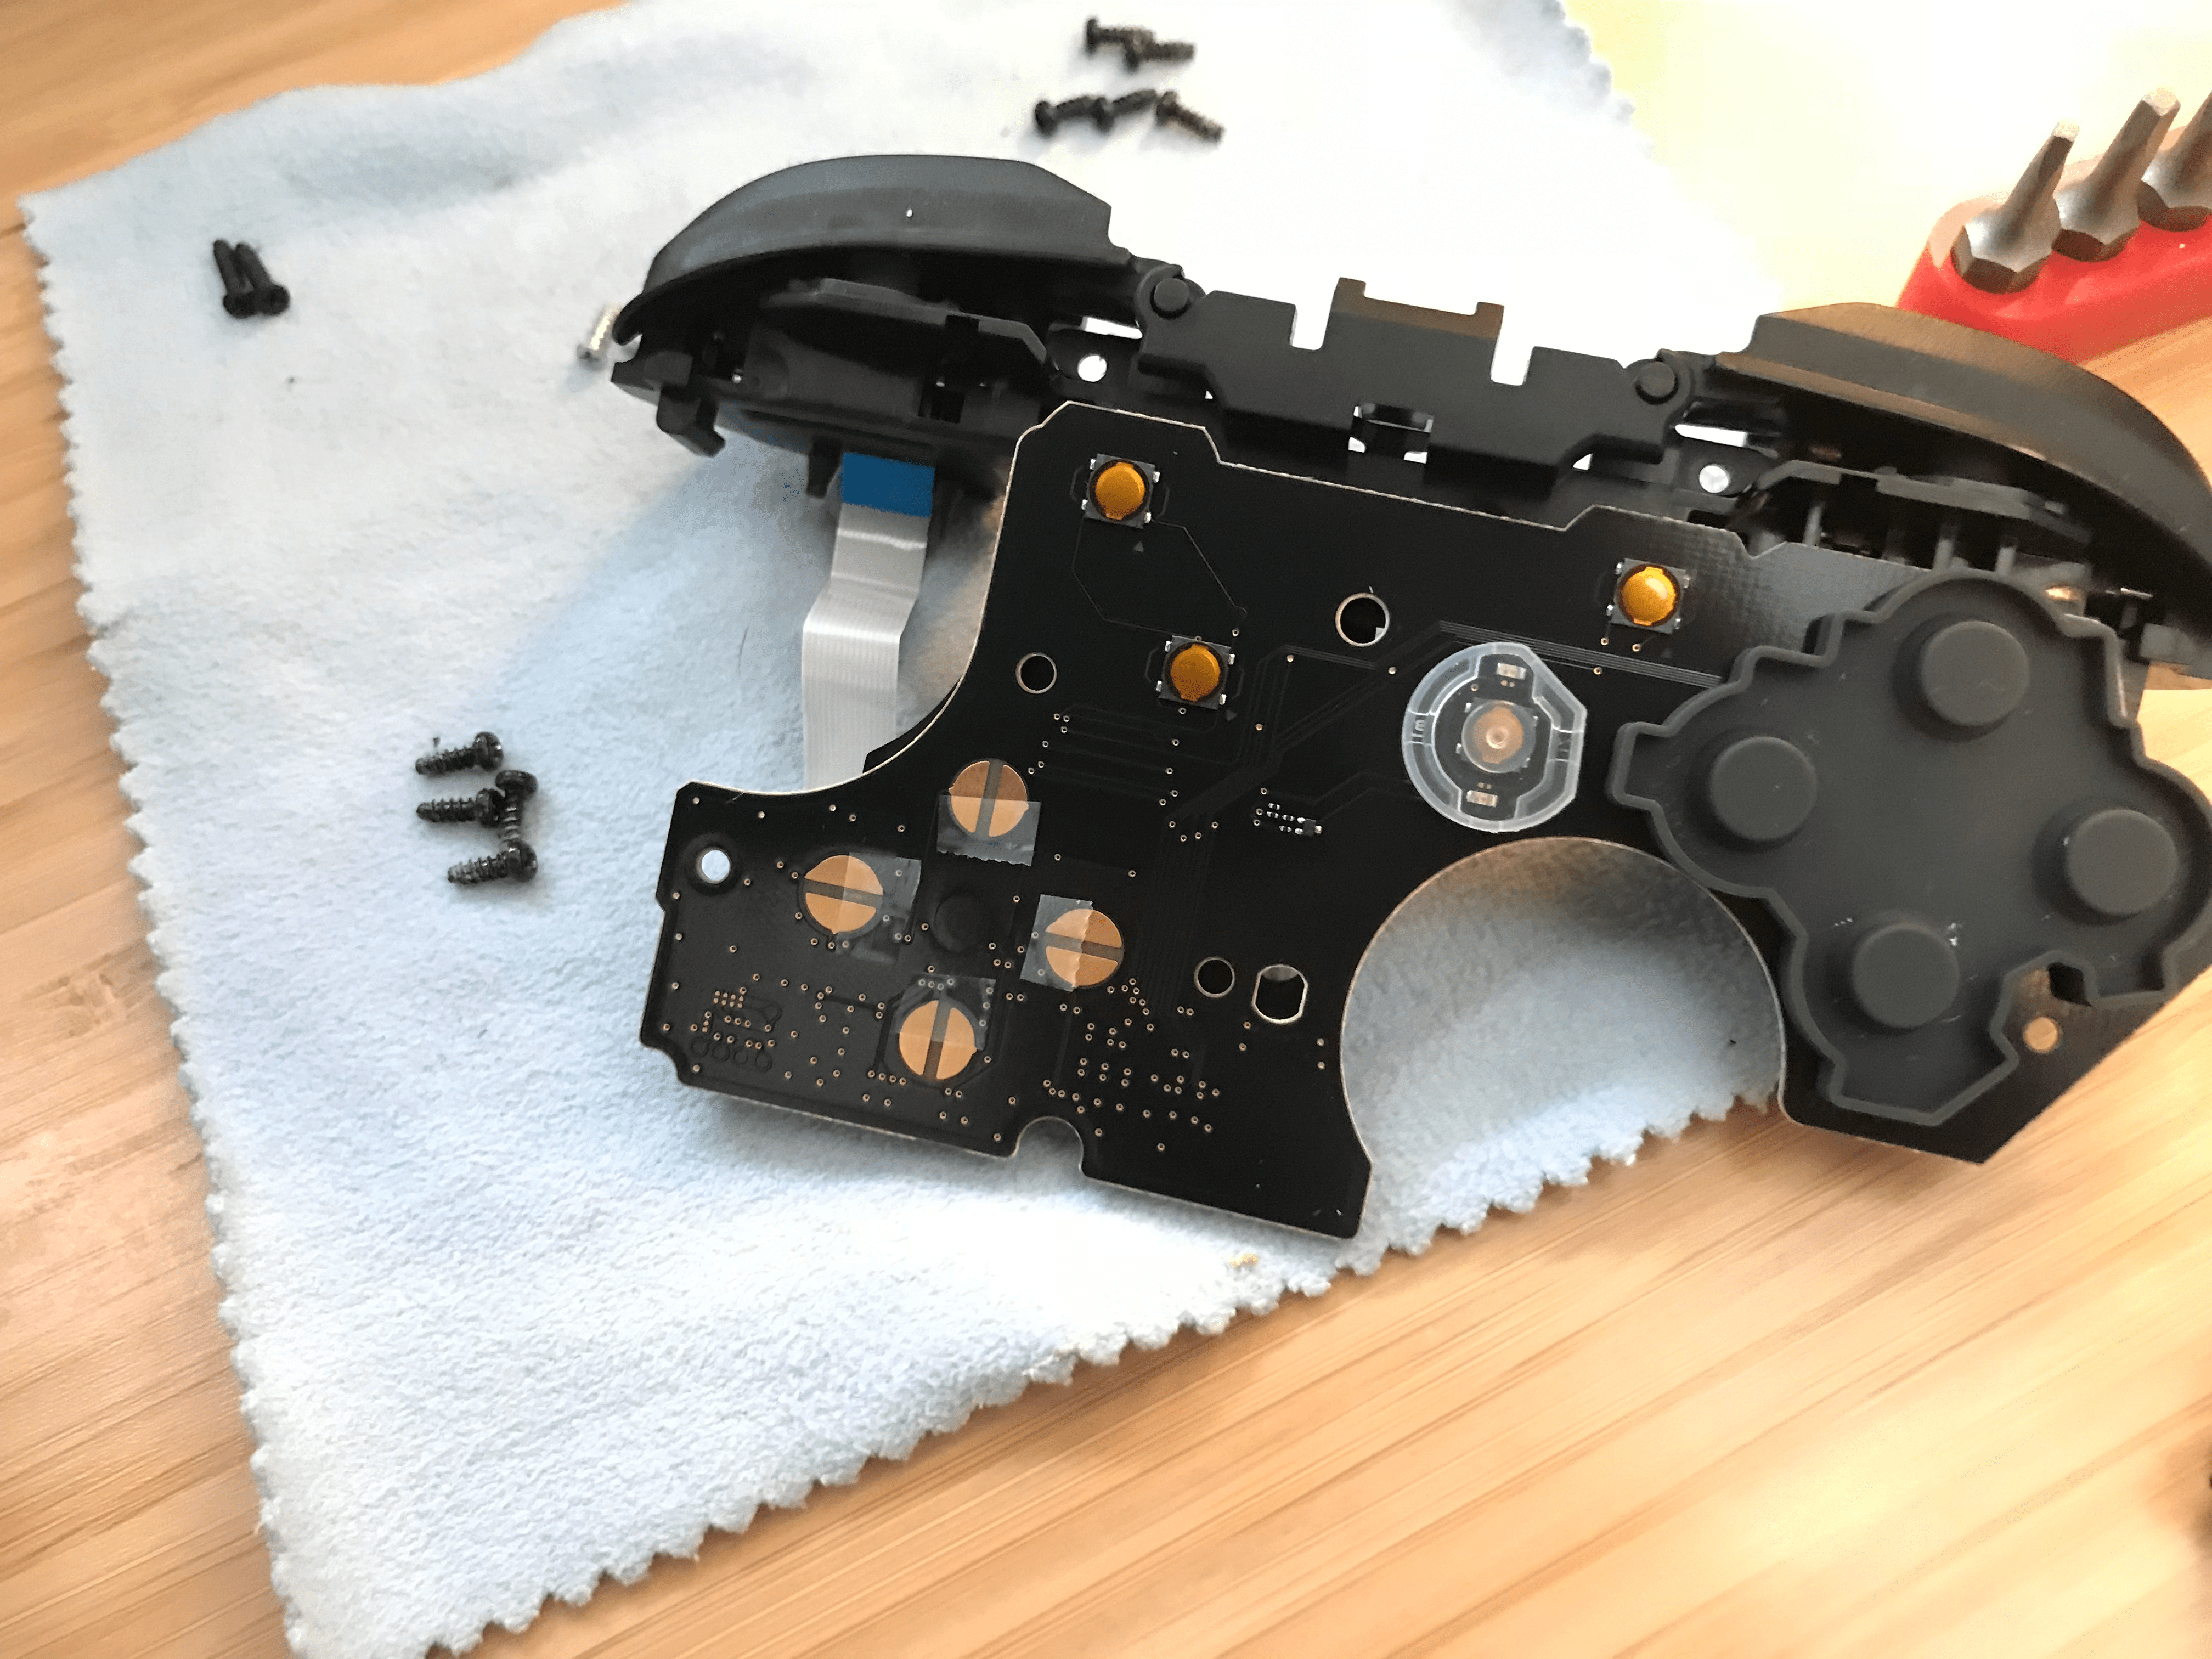 How To Fix Your Switch Pro Controller’s D-Pad